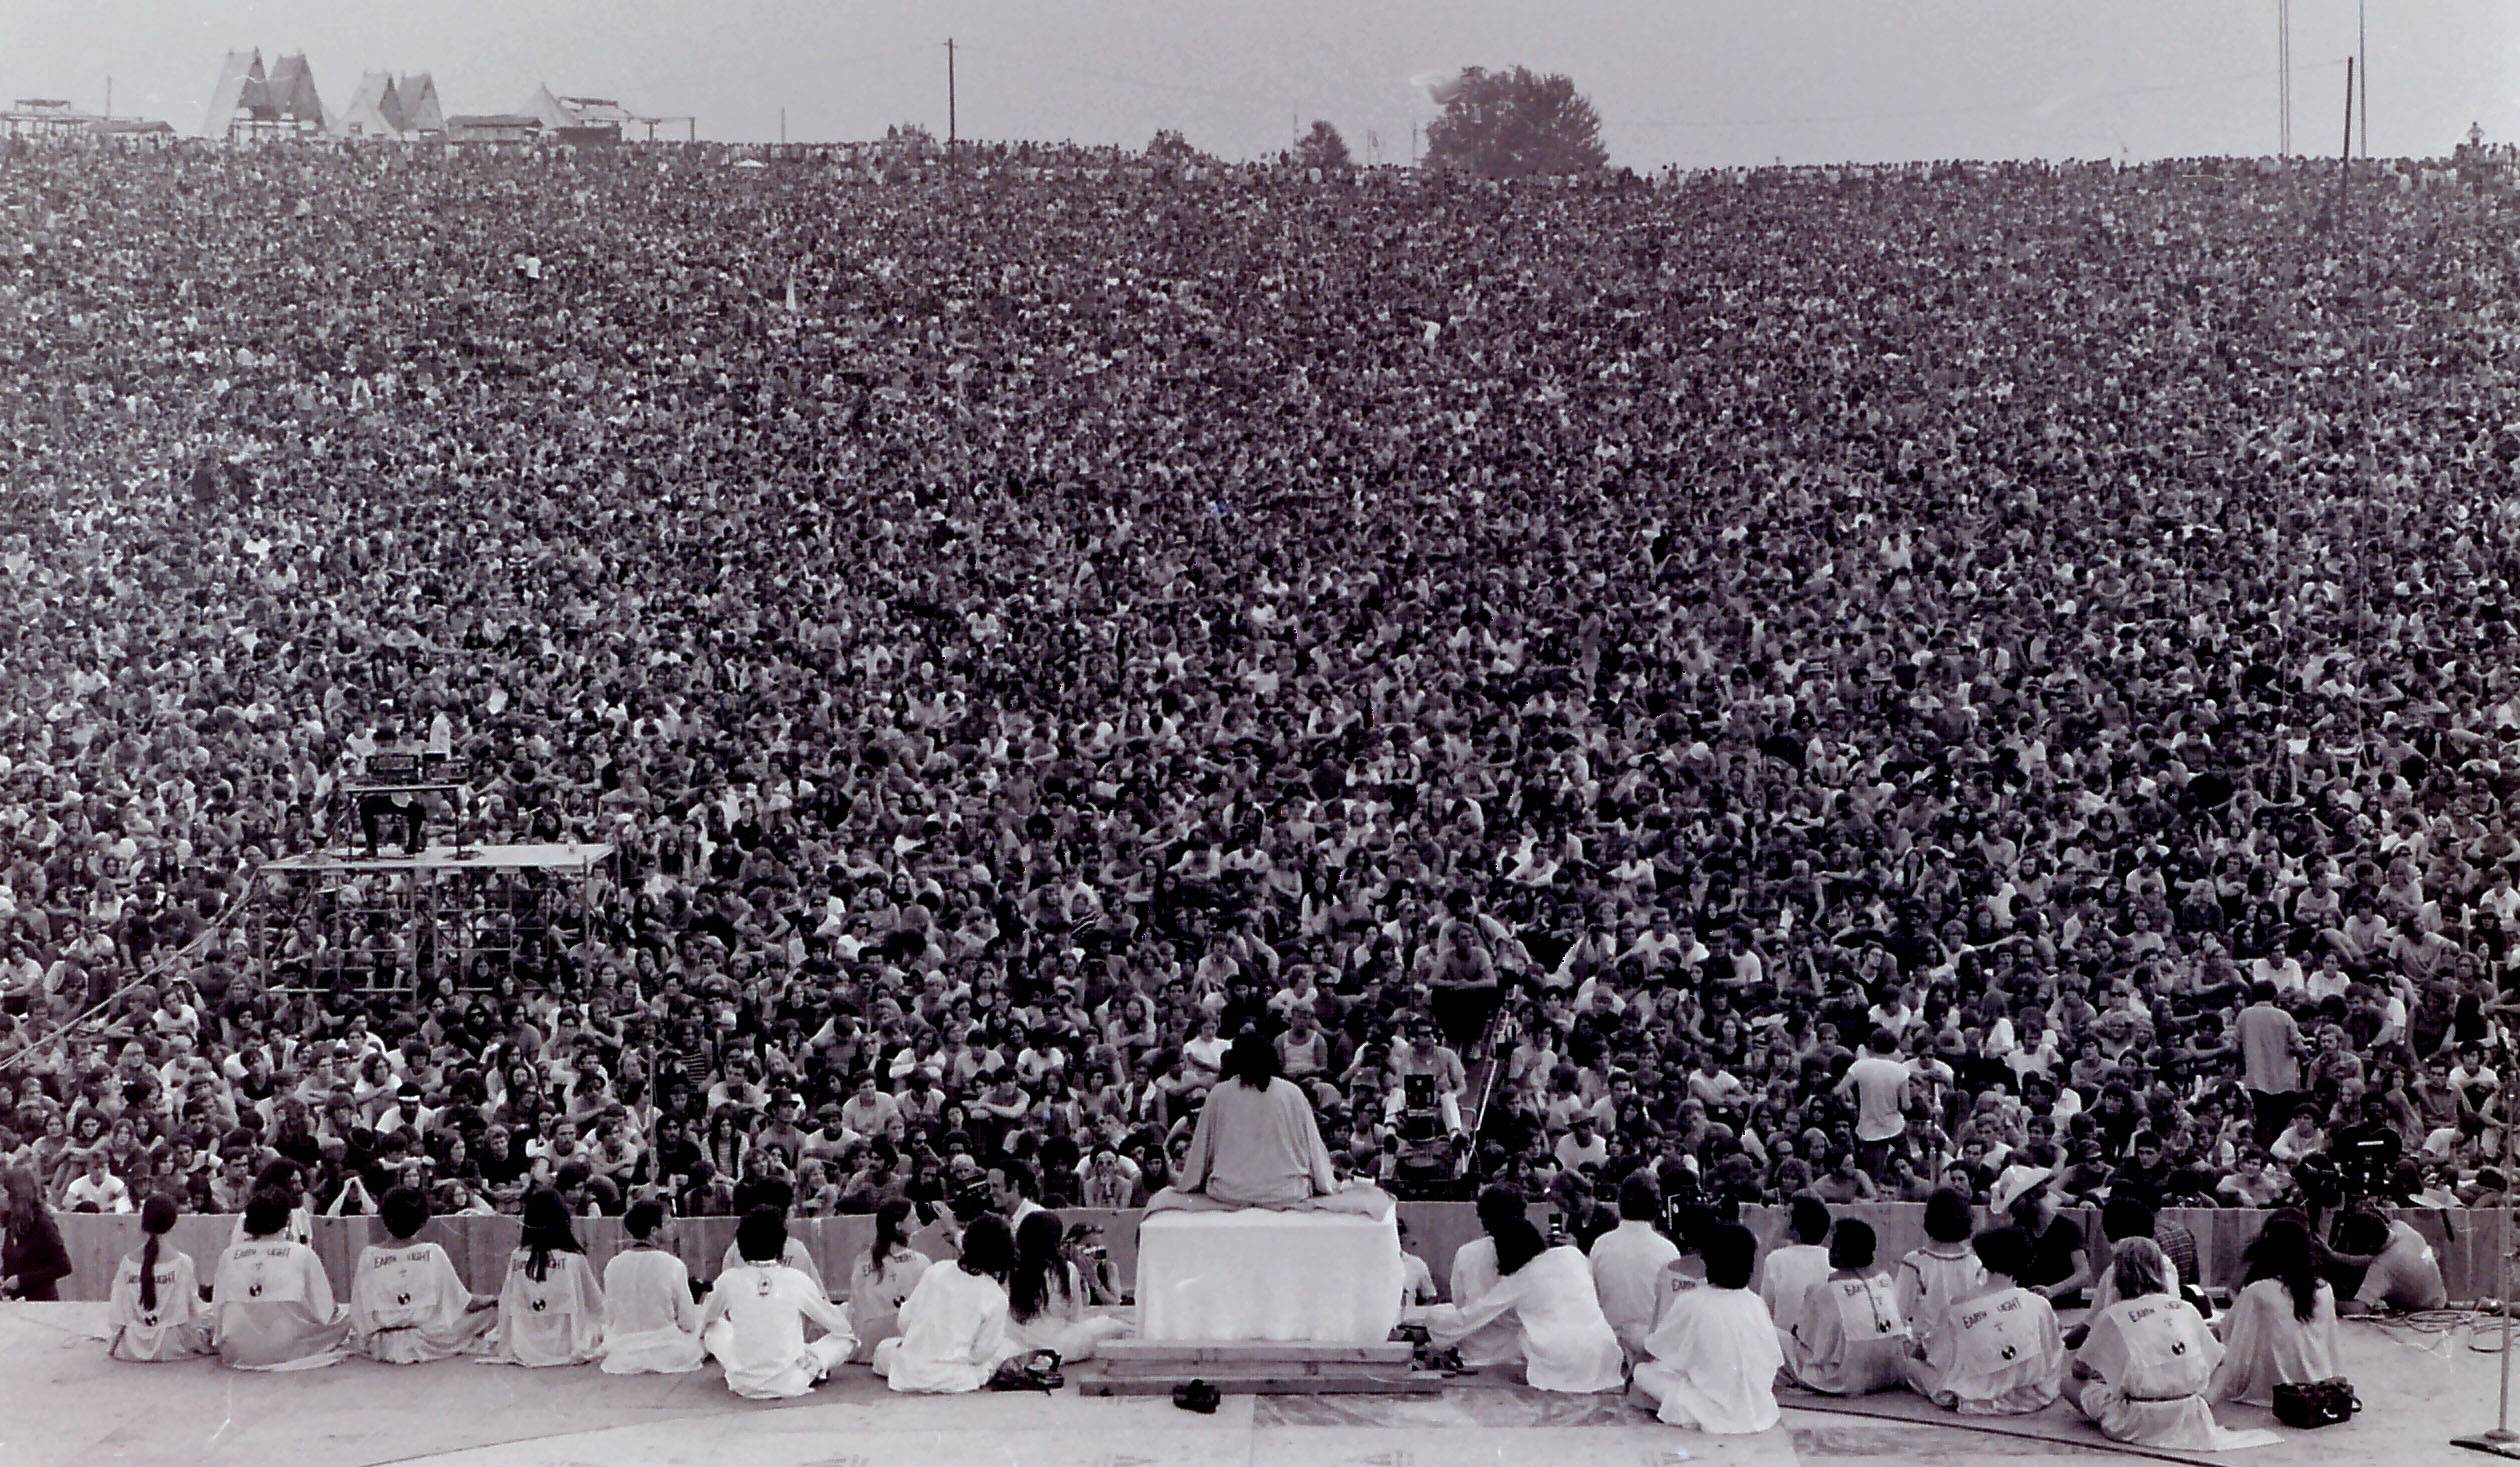 Woodstock Opening Day, 1969